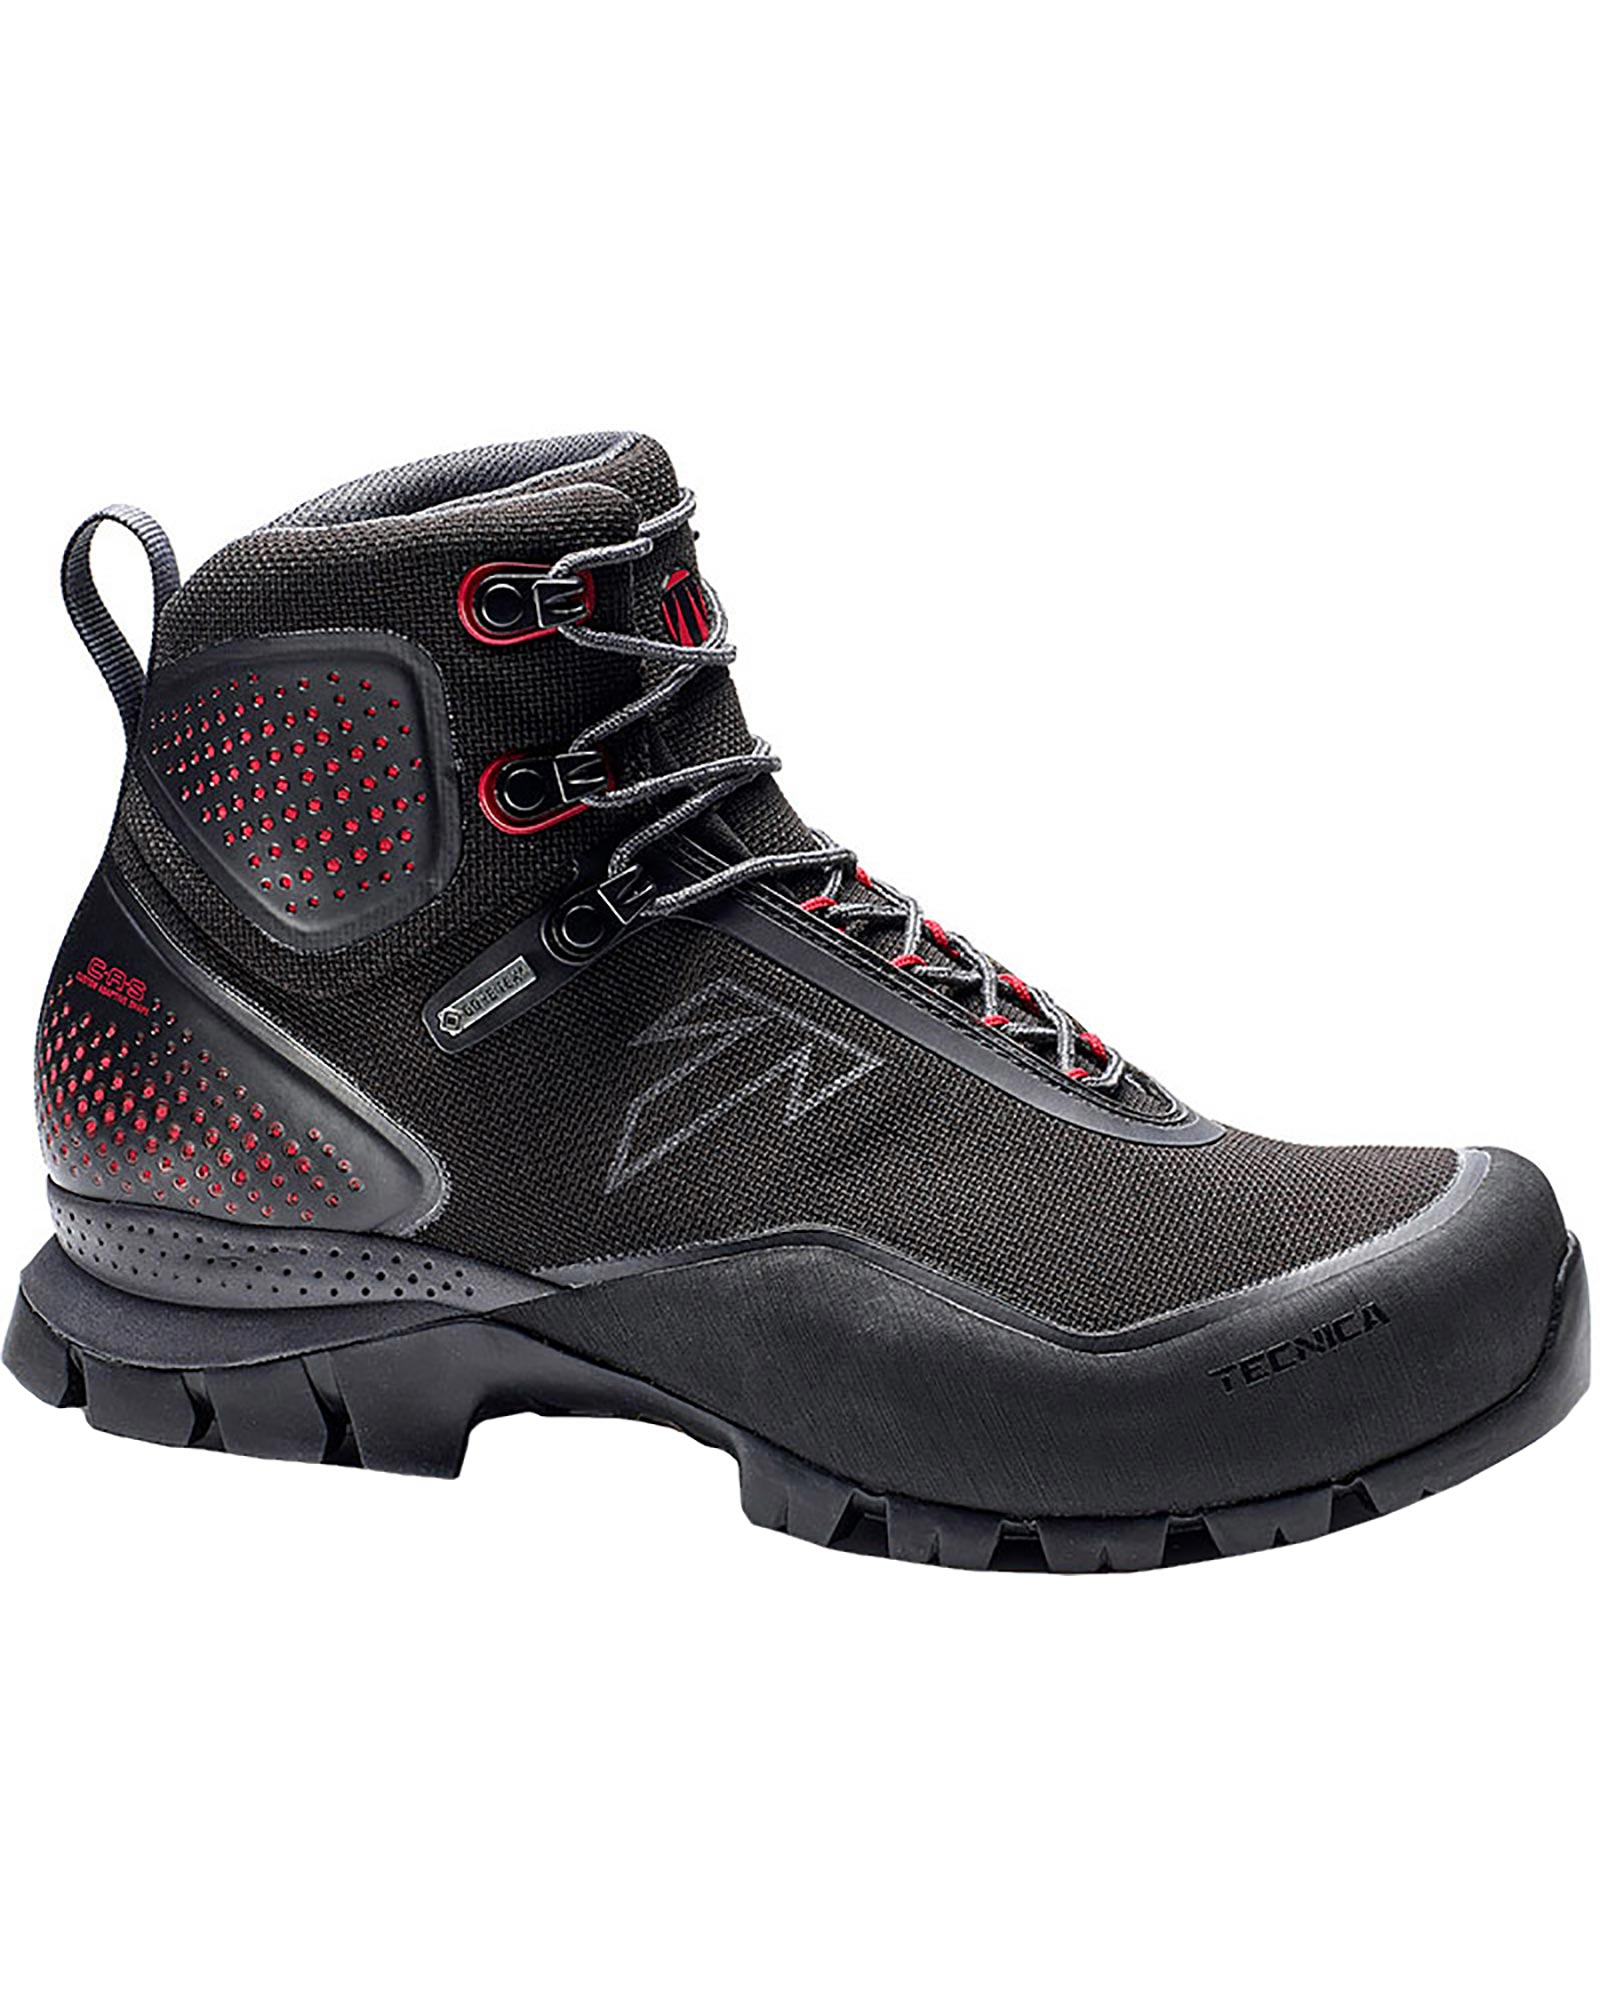 Tecnica Forge S GORE TEX Women’s Boots - Black/Jester Red UK 8